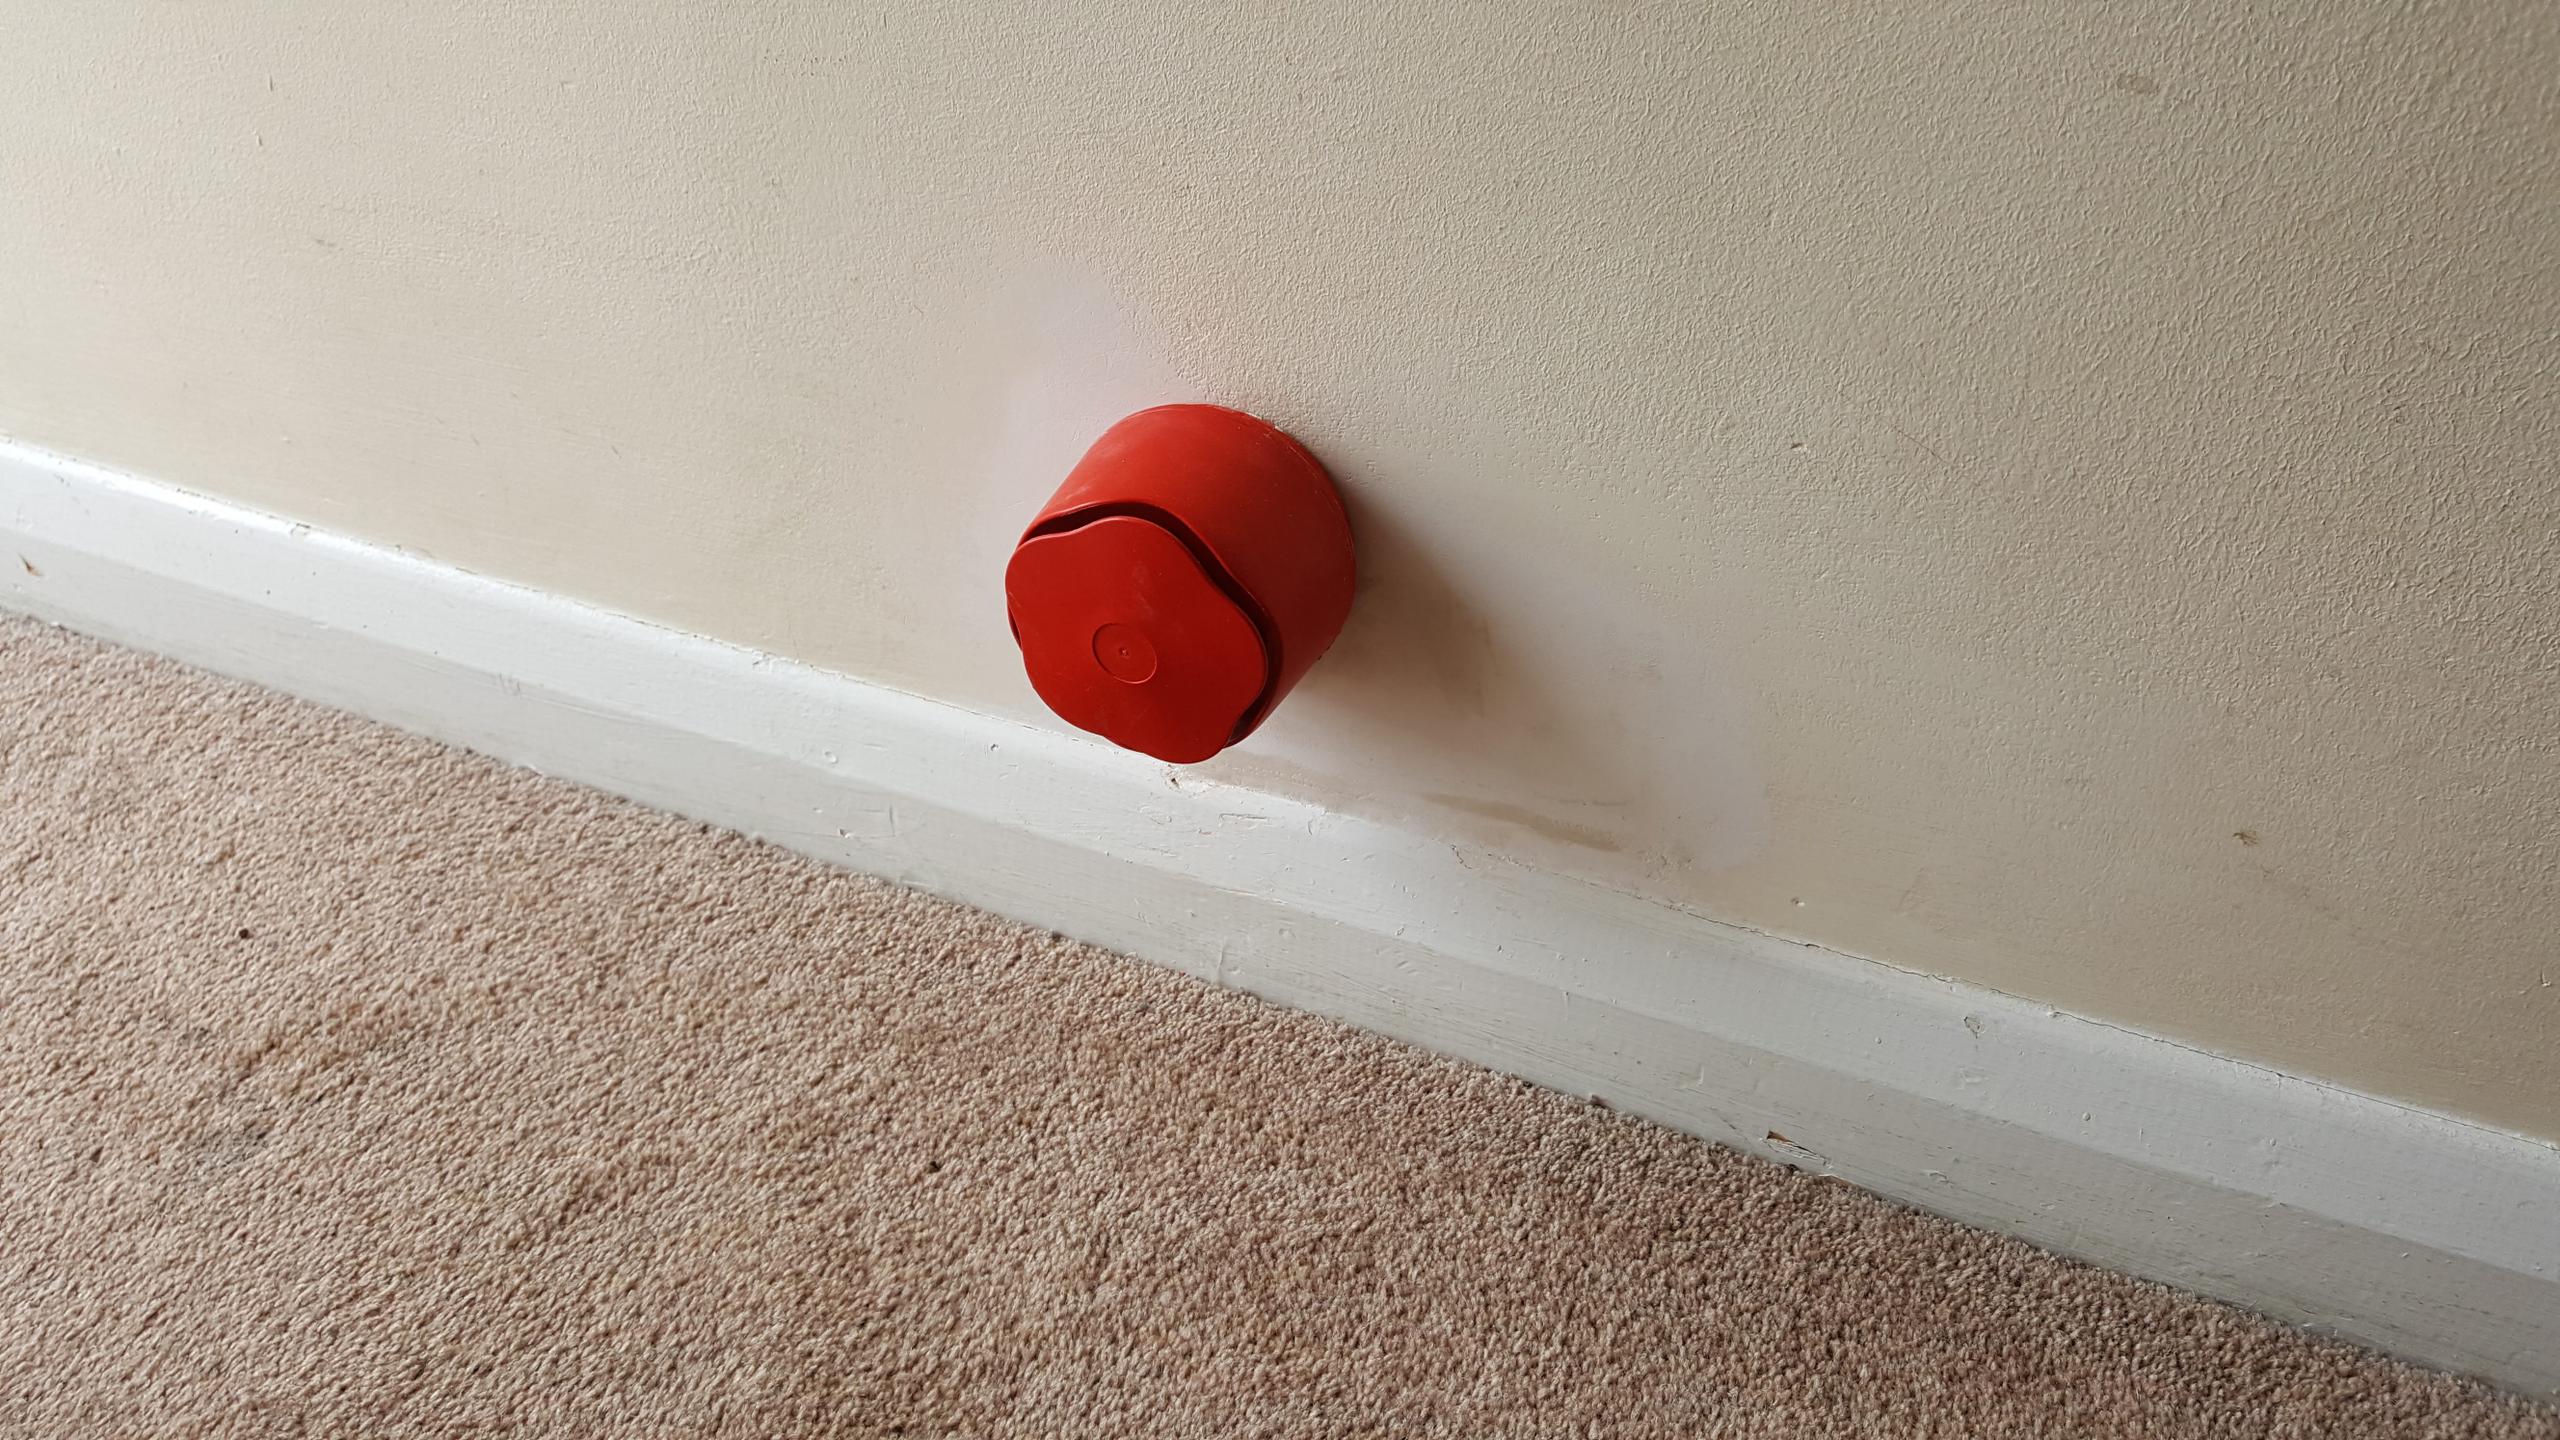 Alarm fixed and ready for client to paint